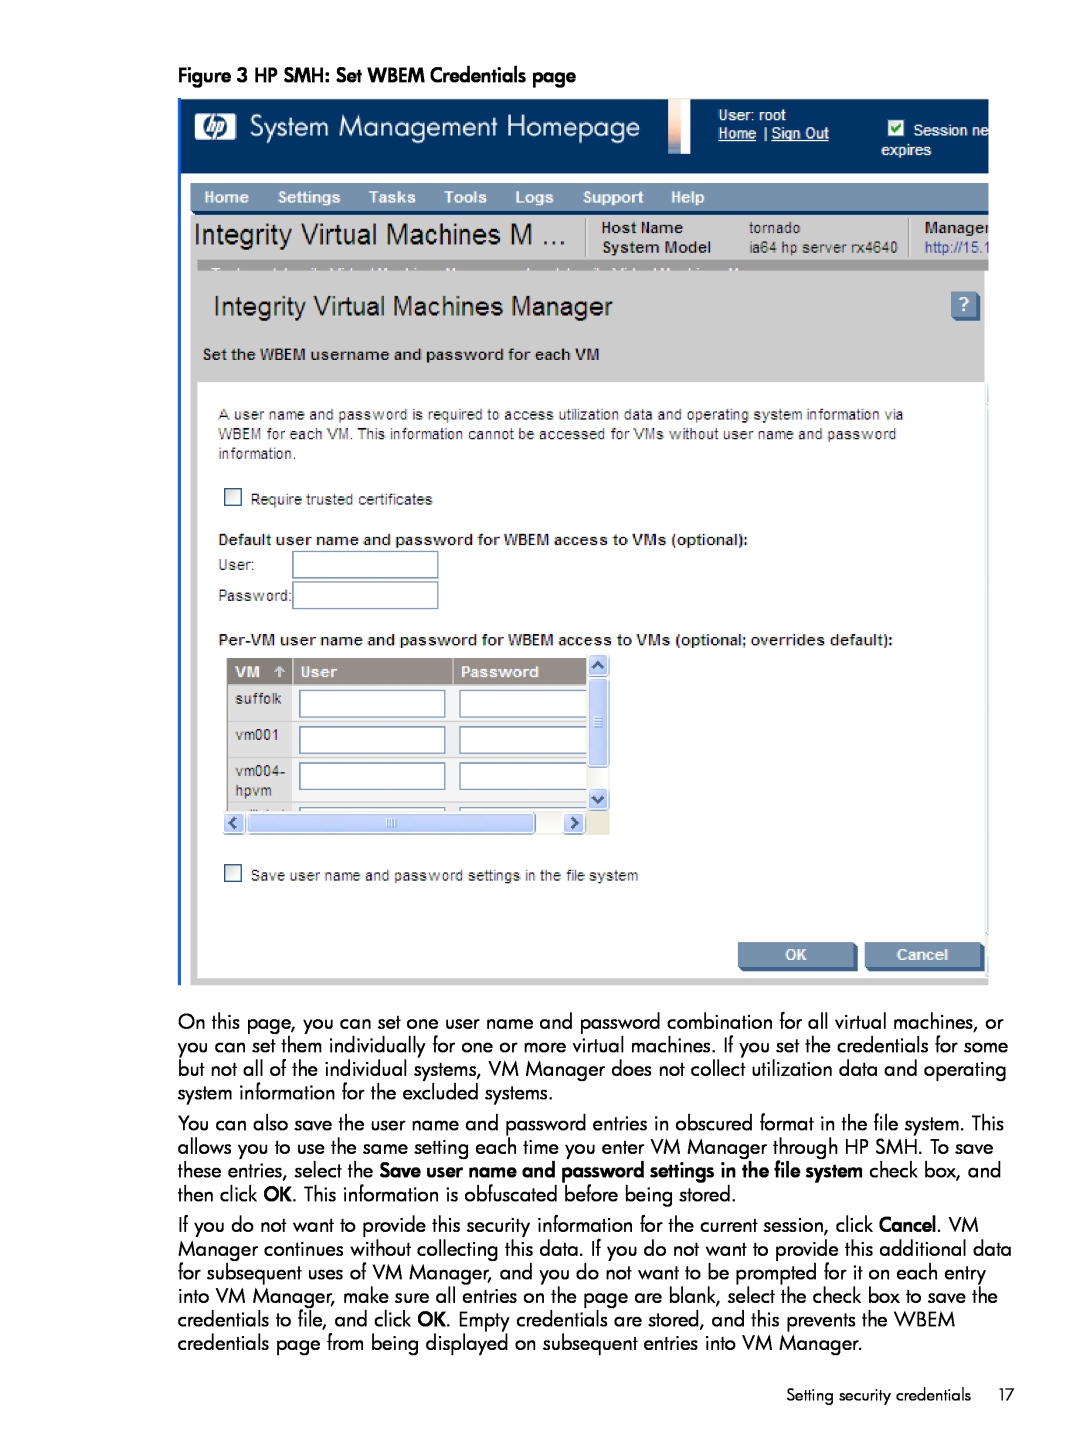 HP UX vPars and Integrity VM v6 manual HP SMH Set WBEM Credentials page 